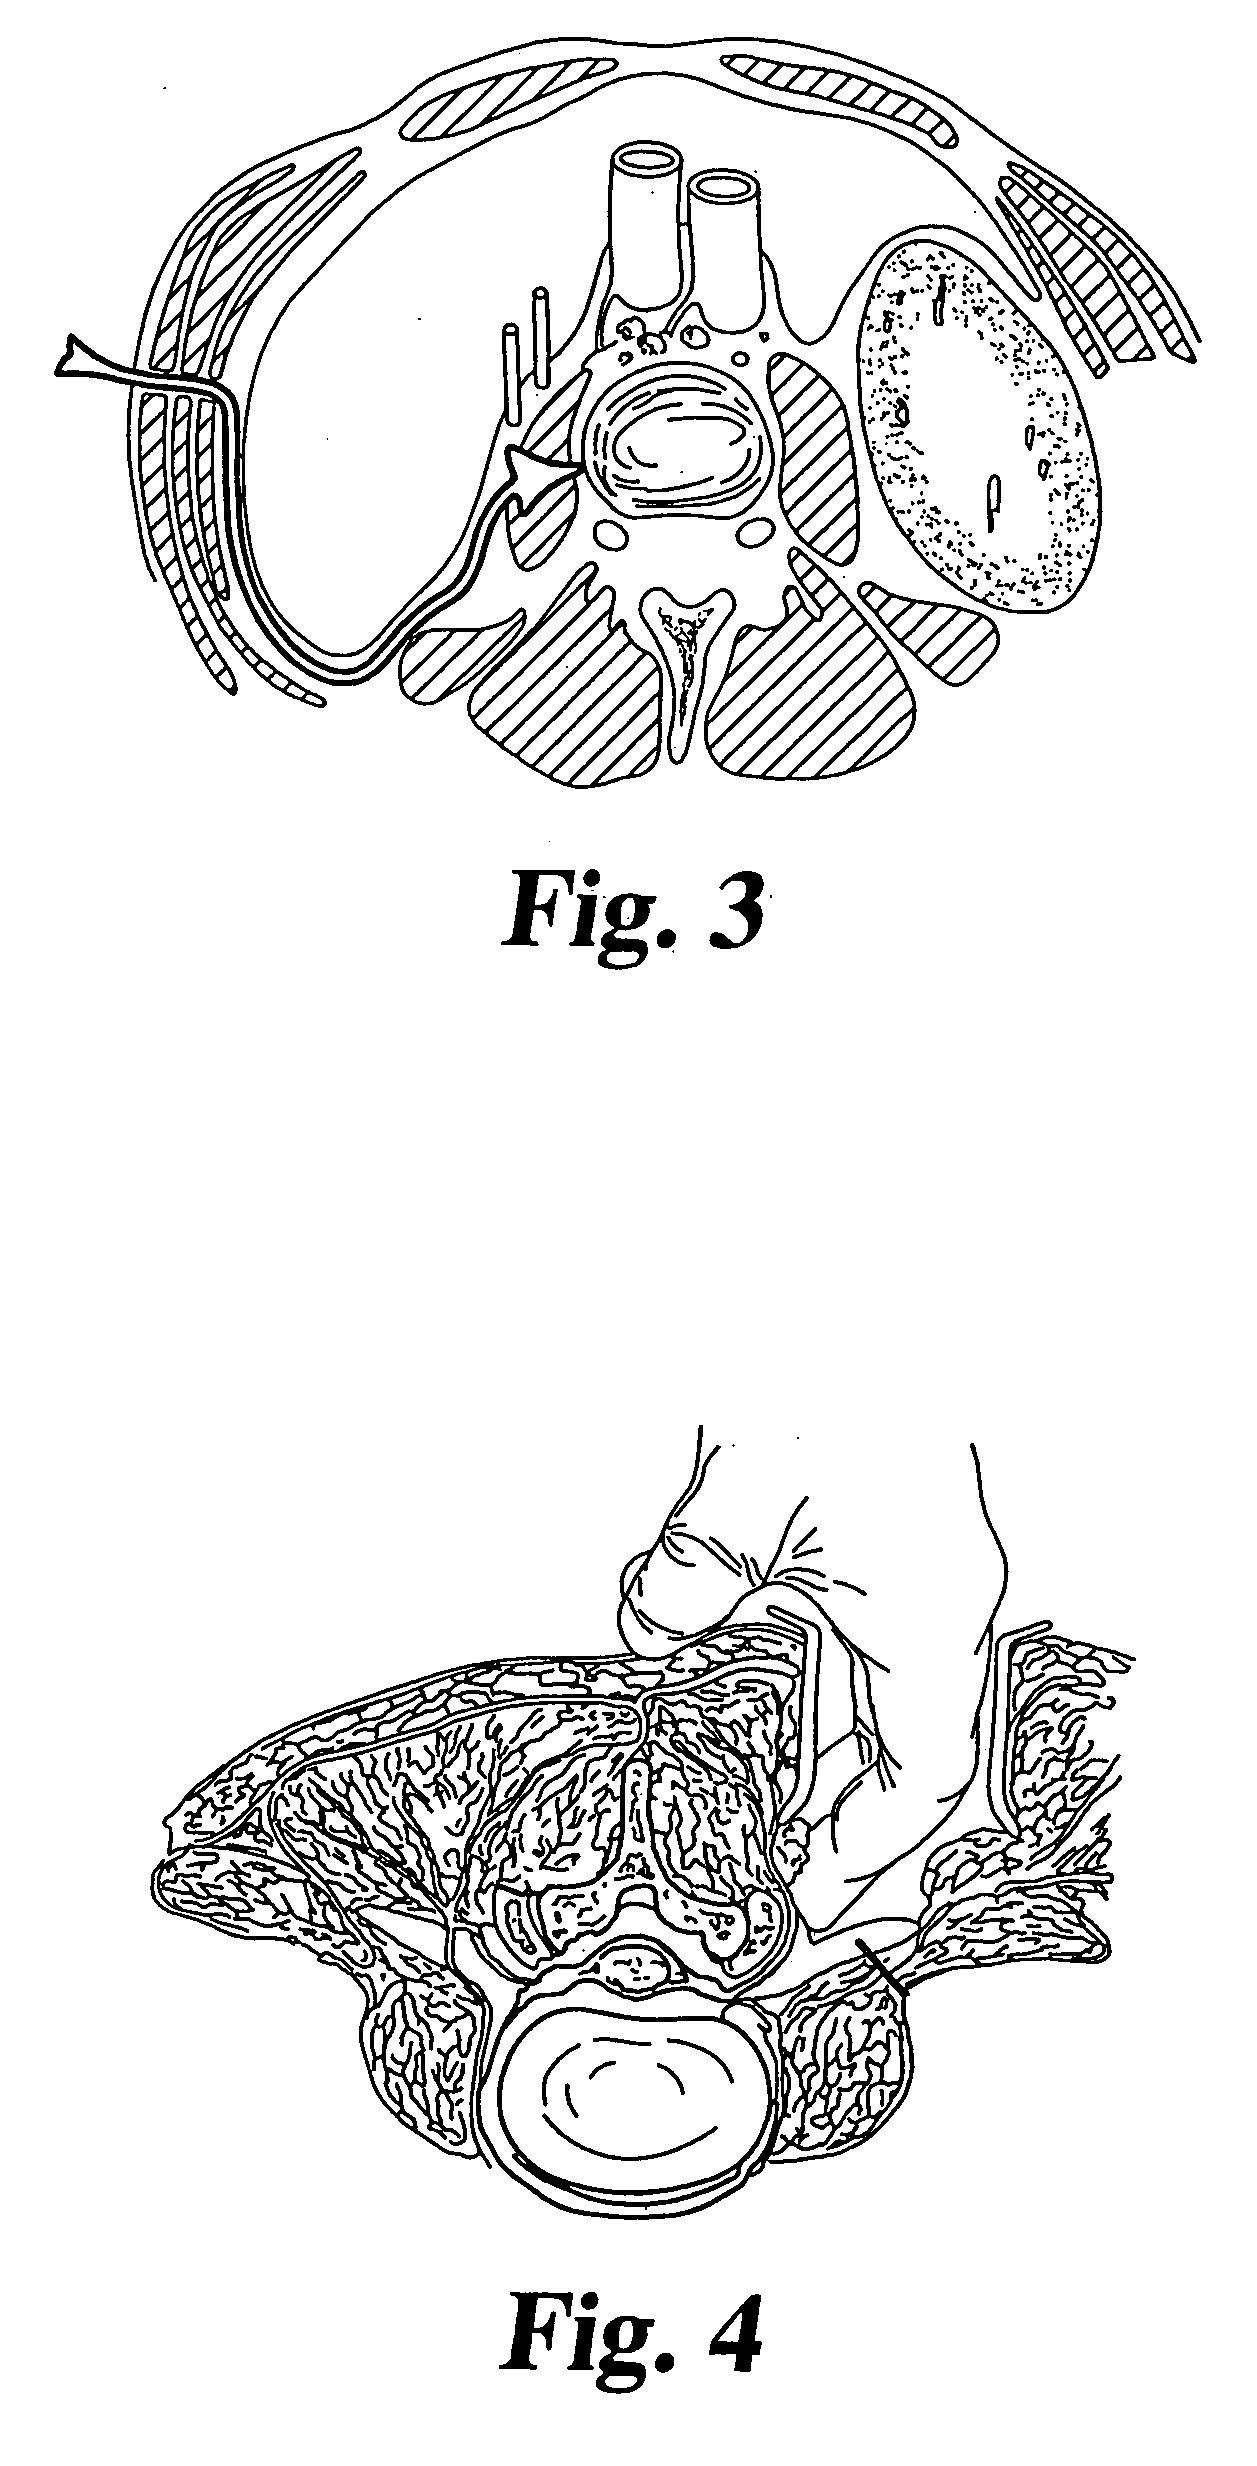 Apparatus and kit for injecting a curable biomaterial into into an intervertebral space